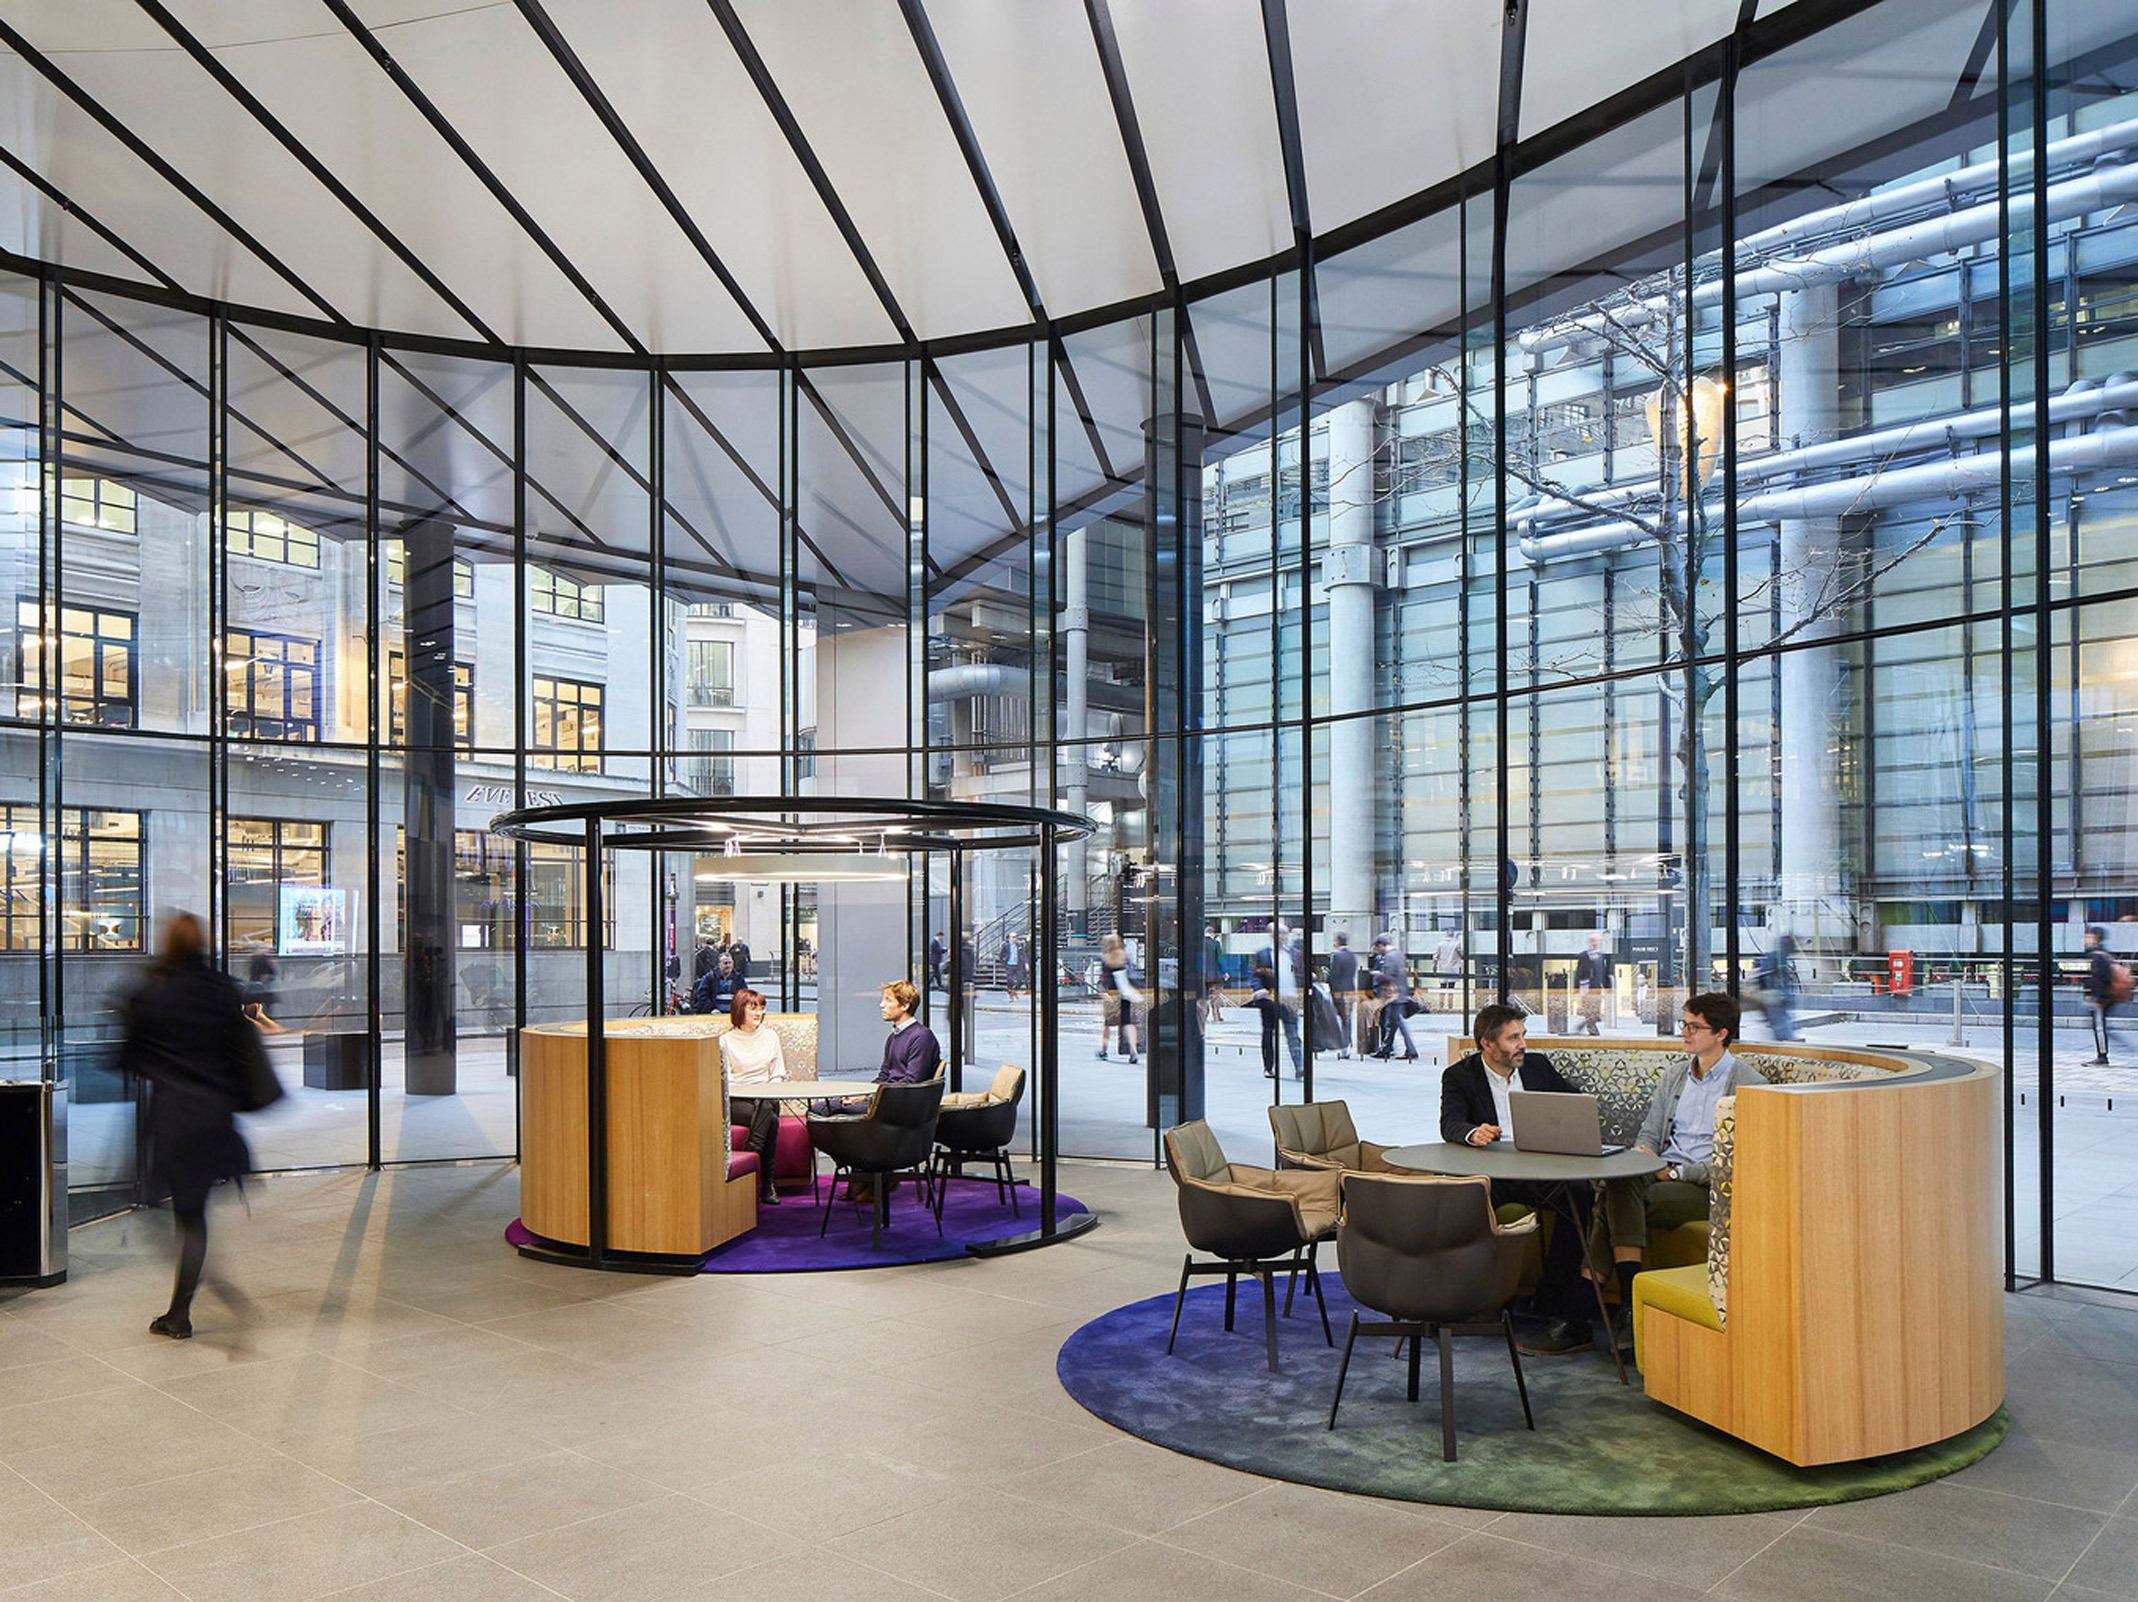 Open-plan office lobby with floor-to-ceiling glass walls. Central seating pod with integrated technology, flanked by casual chairs and felt dividers. Dynamic contrast between bustling exterior and focused collaborative spaces within.